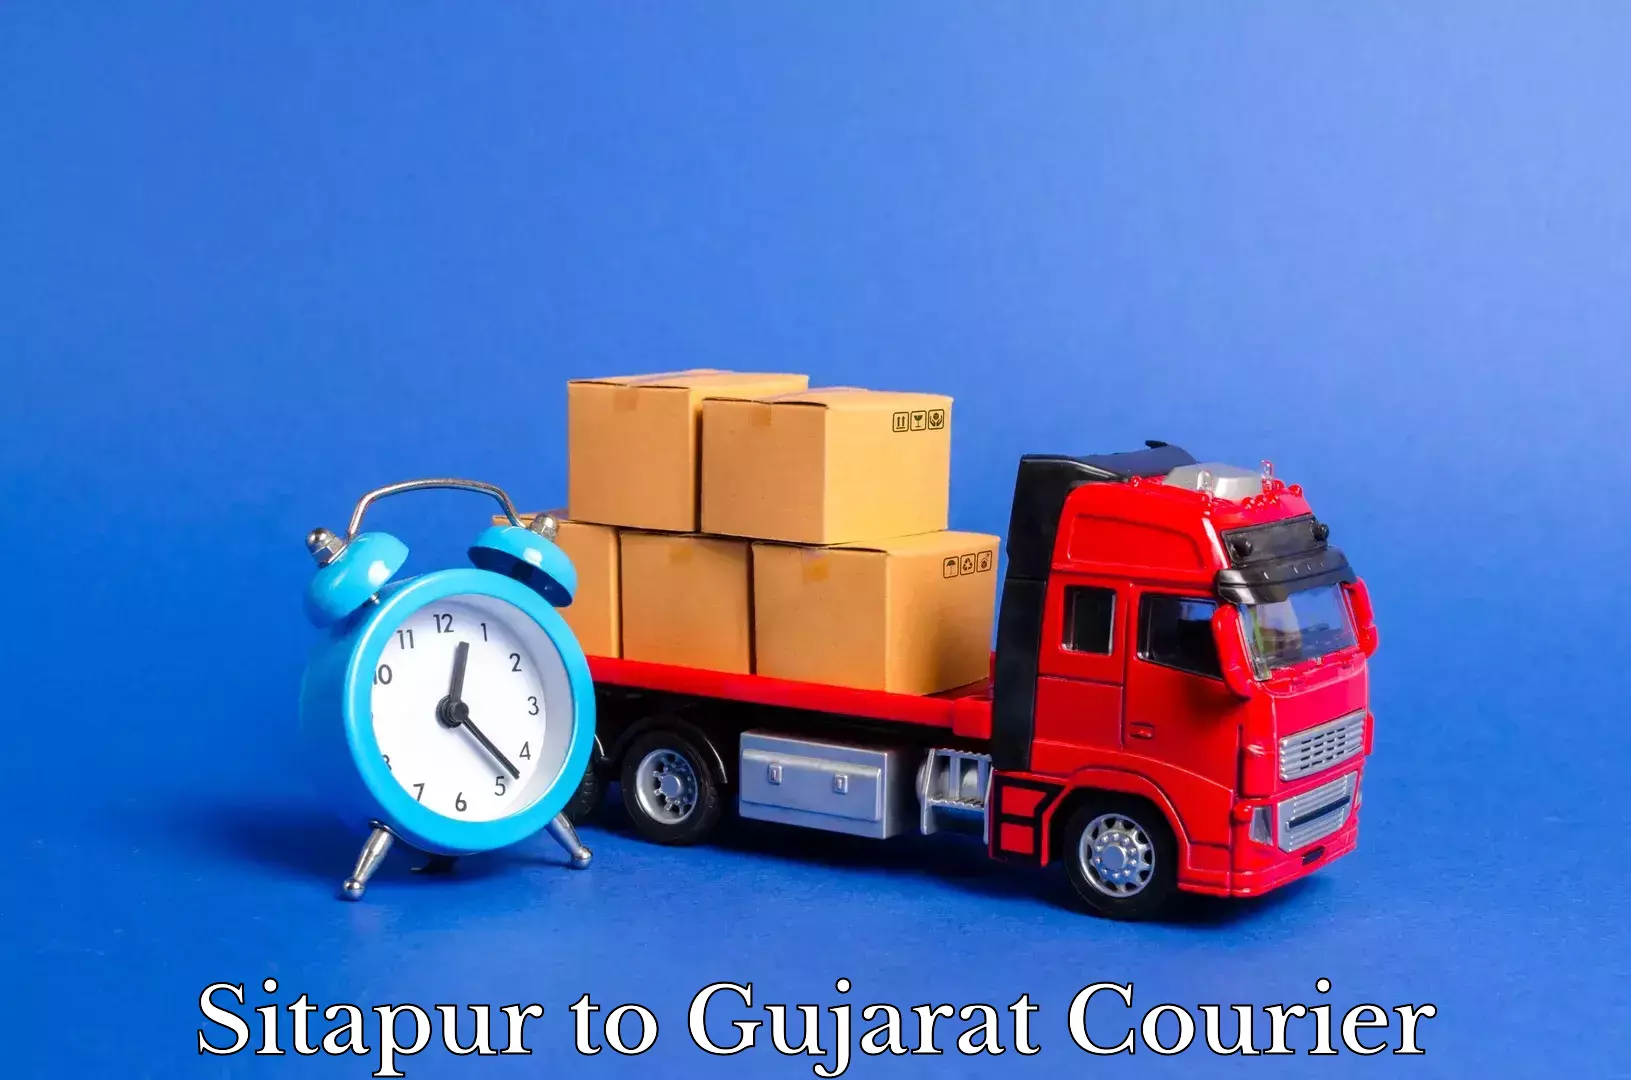 Quality relocation assistance Sitapur to Gujarat